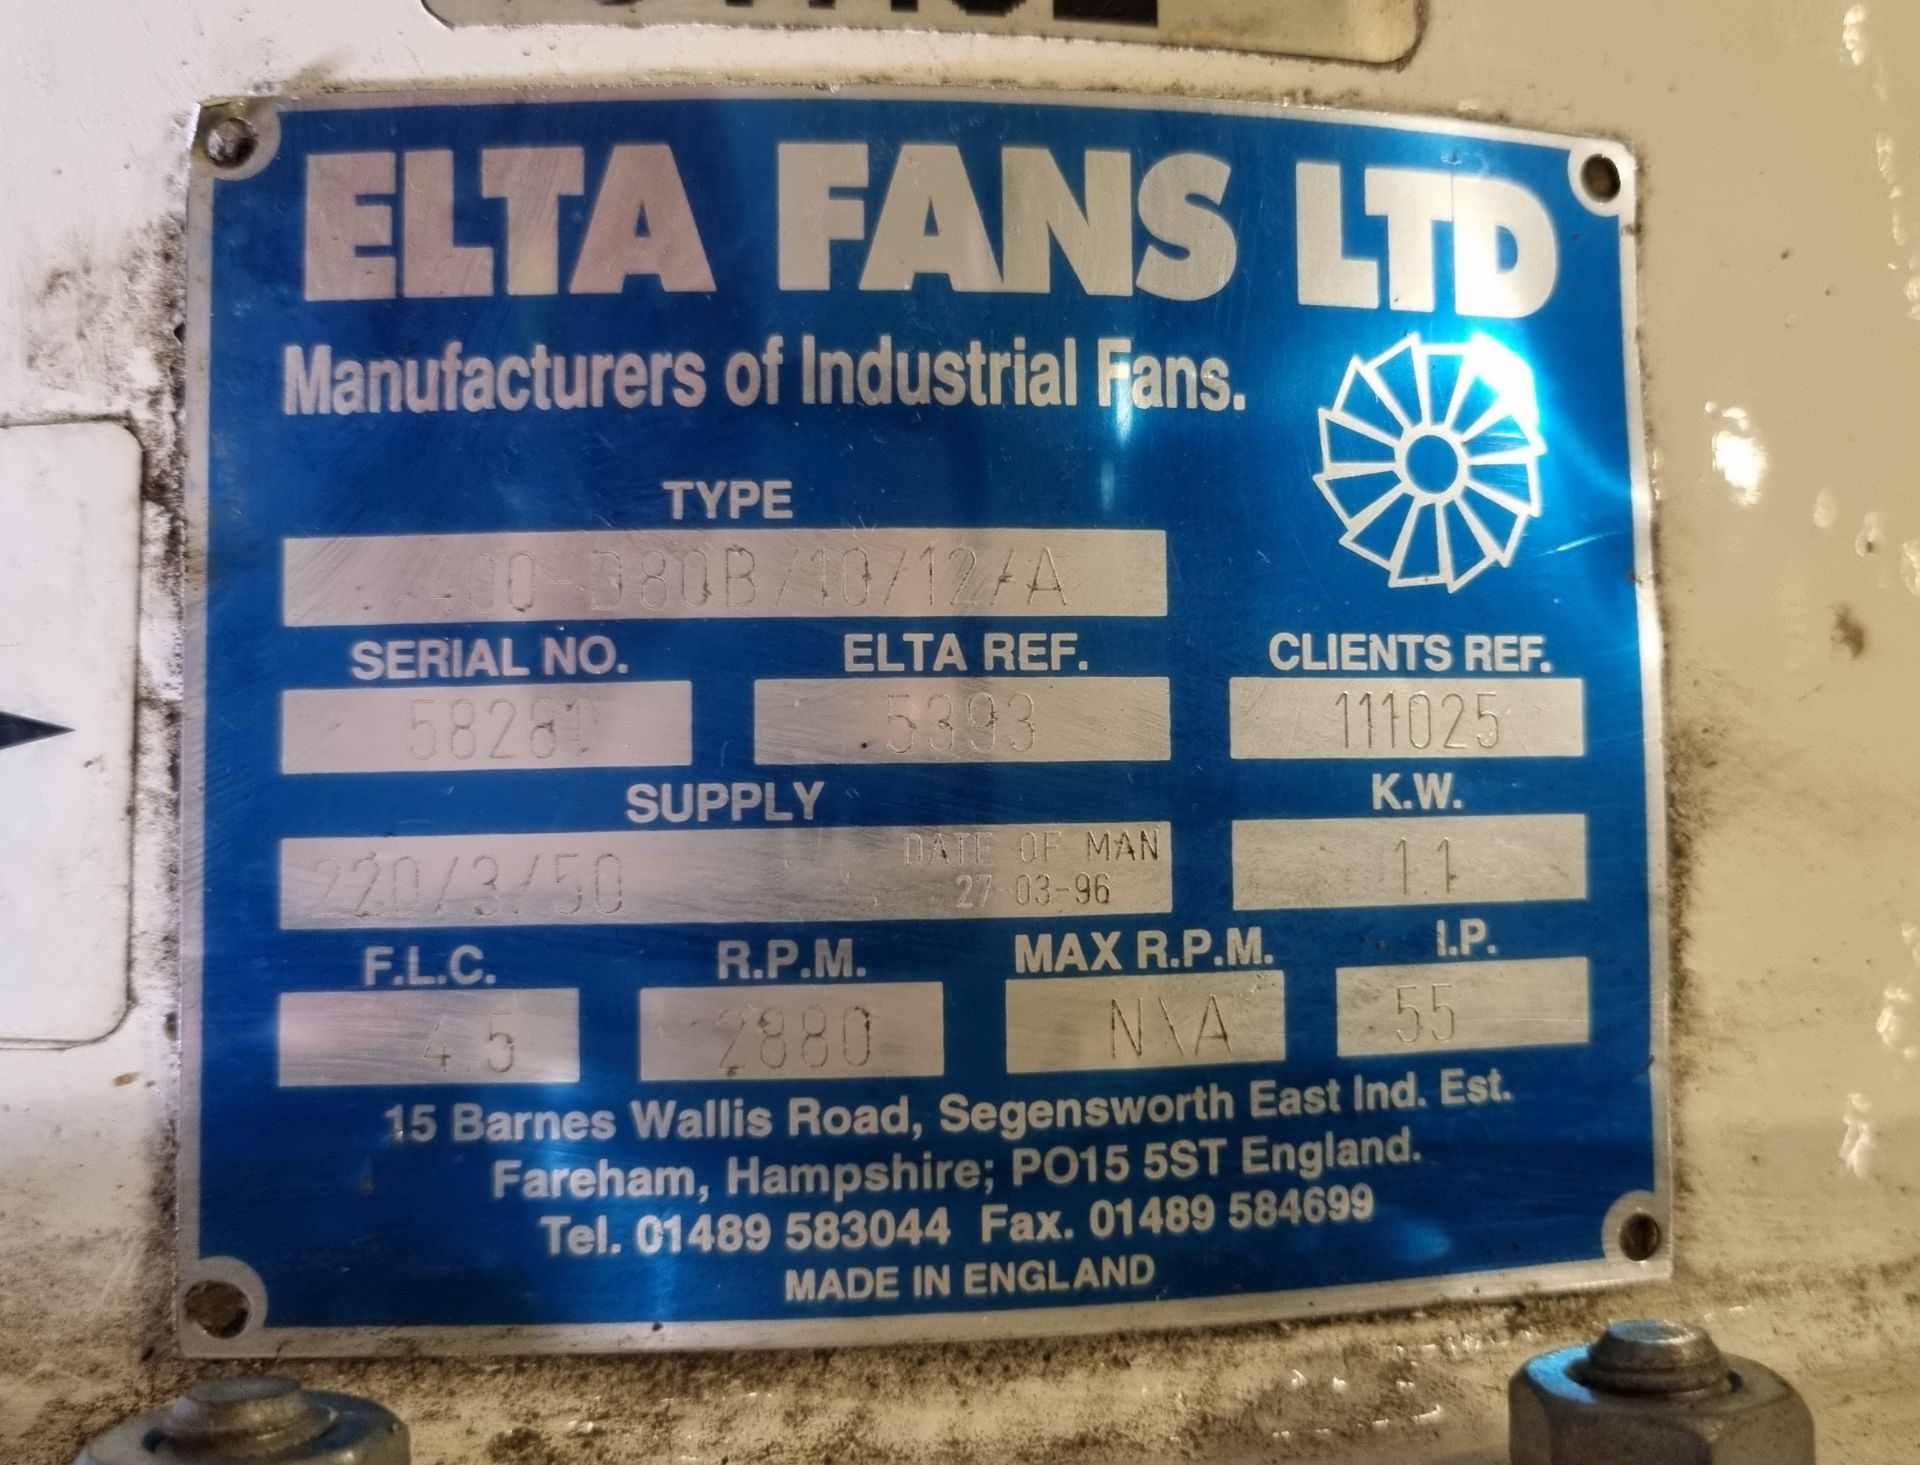 Elta industrial 2 stage fan unit - 400/D80B/10/12/A (1st stage) 400/D80B/10/15/A (2nd stage) - Image 11 of 12